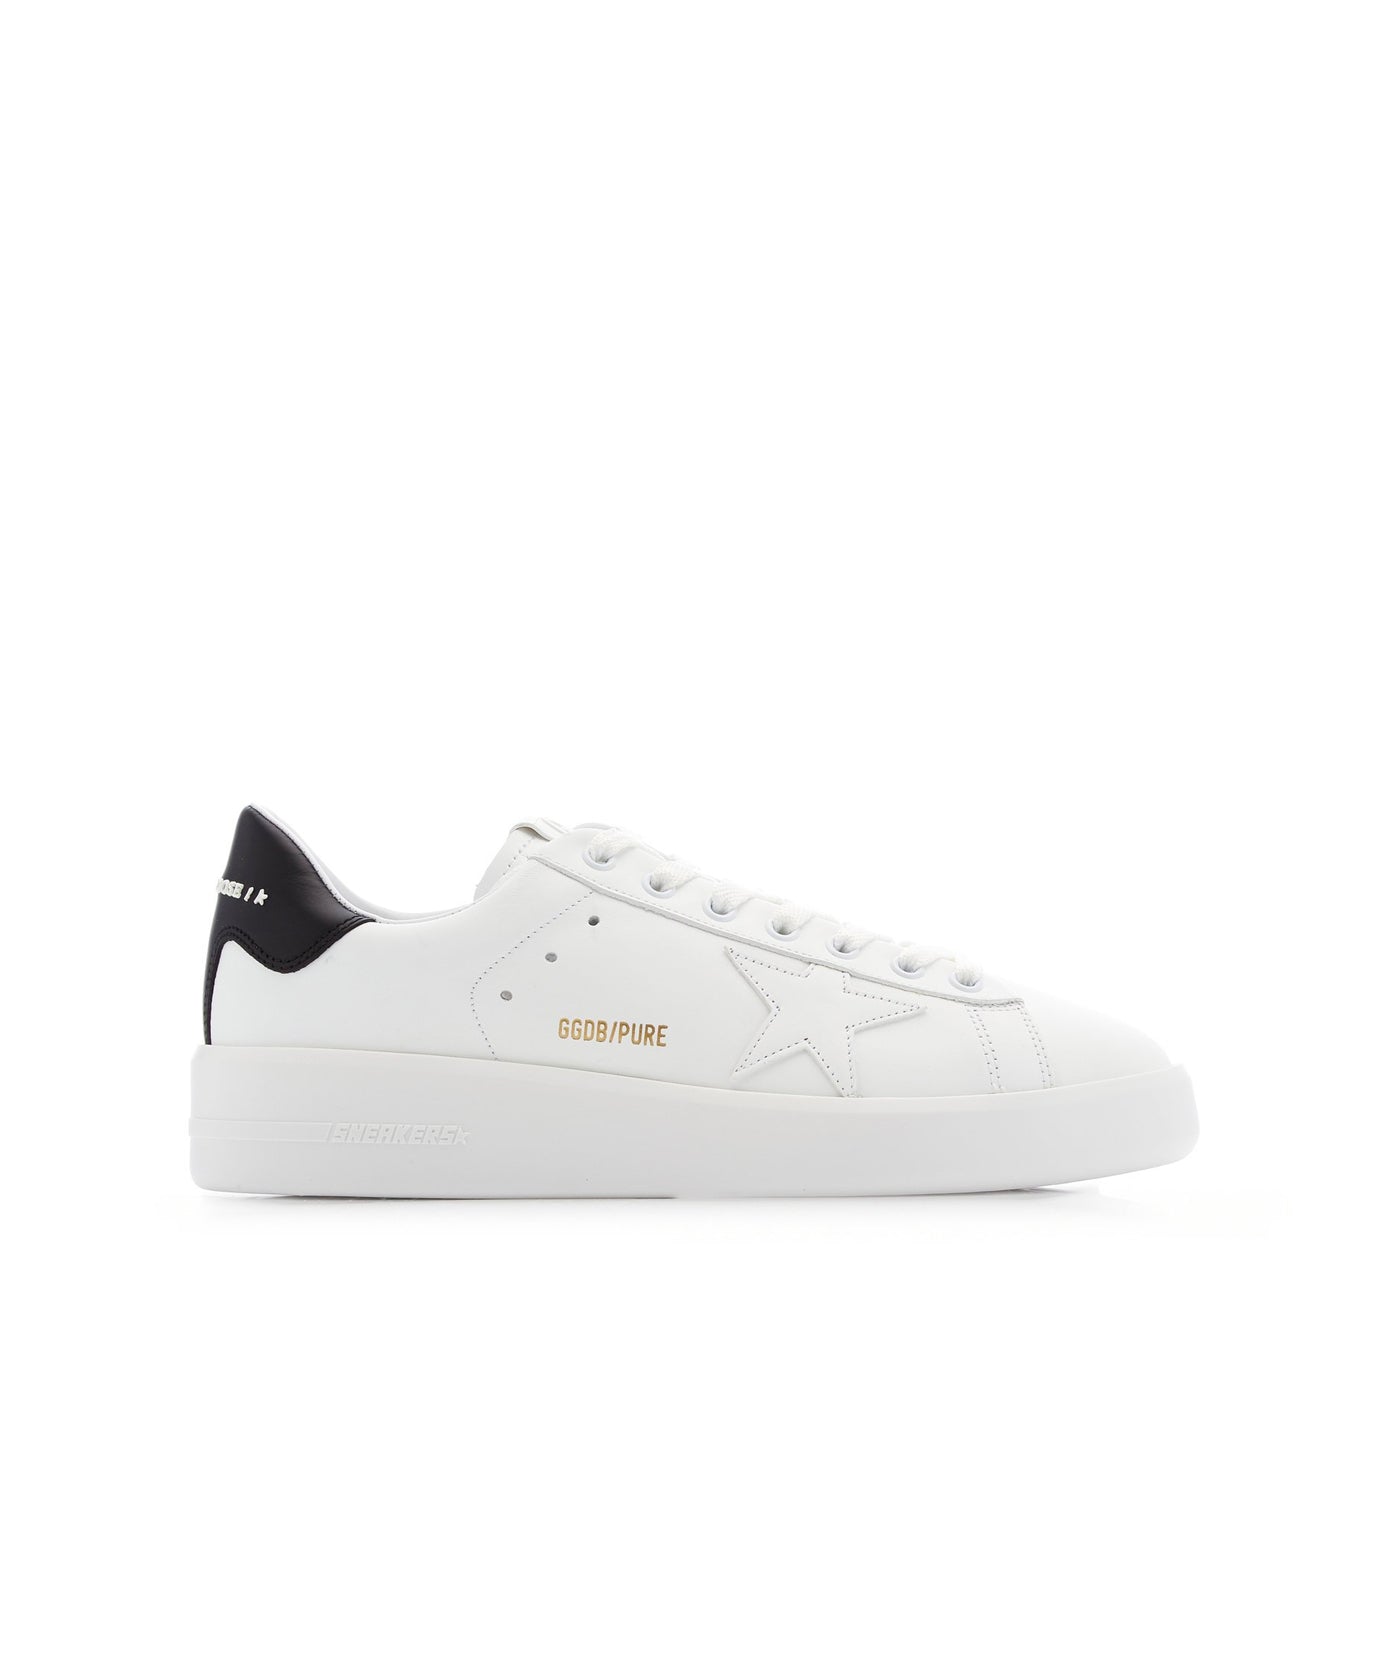 Golden Goose Pure Star Sneaker Black and White at Violet x Grace Miami